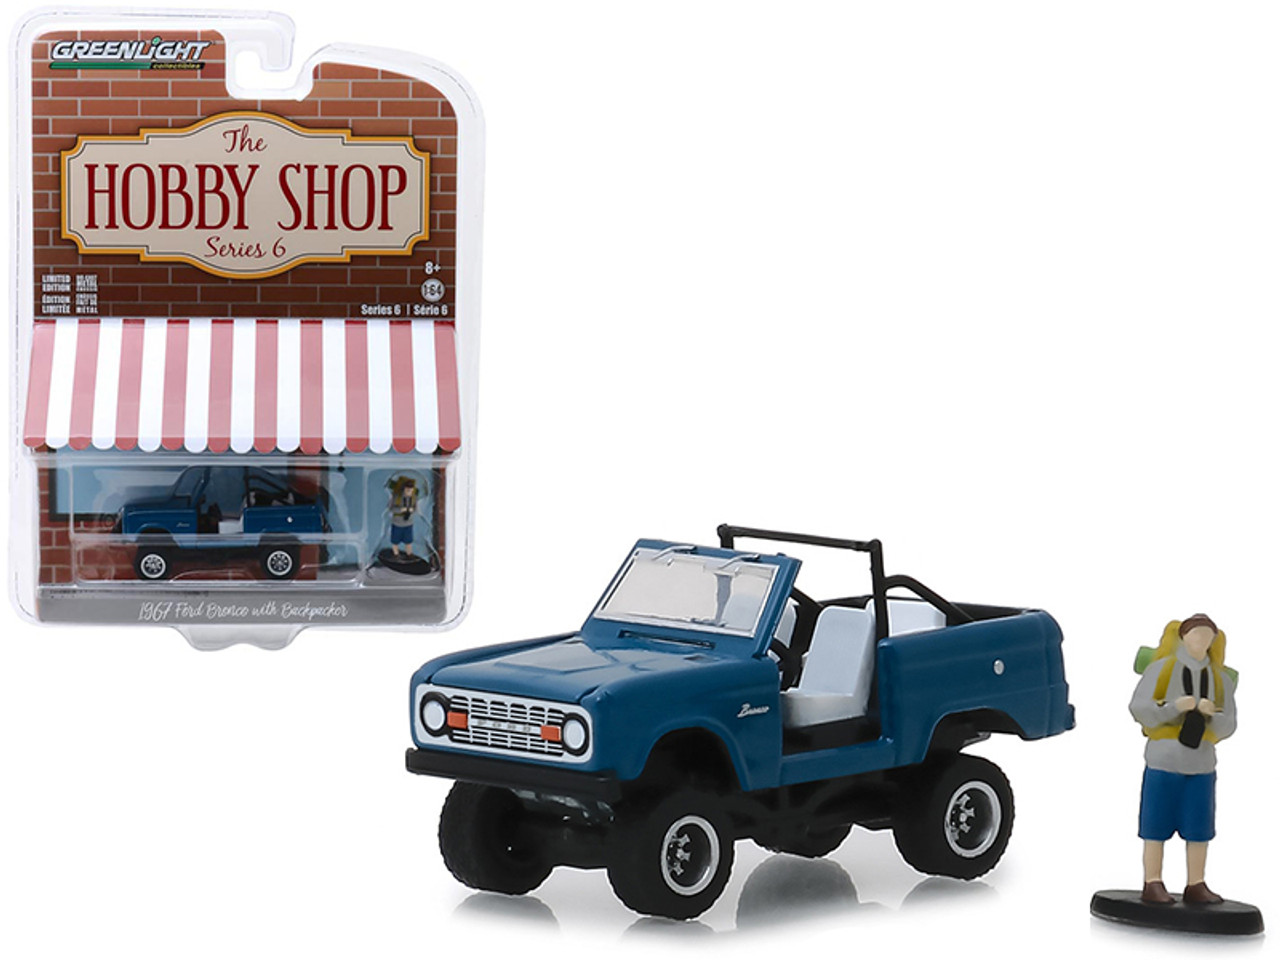 1967 Ford Bronco Dark Blue (Doors Removed) with Backpacker Figure "The Hobby Shop" Series 6 1/64 Diecast Model Car by Greenlight